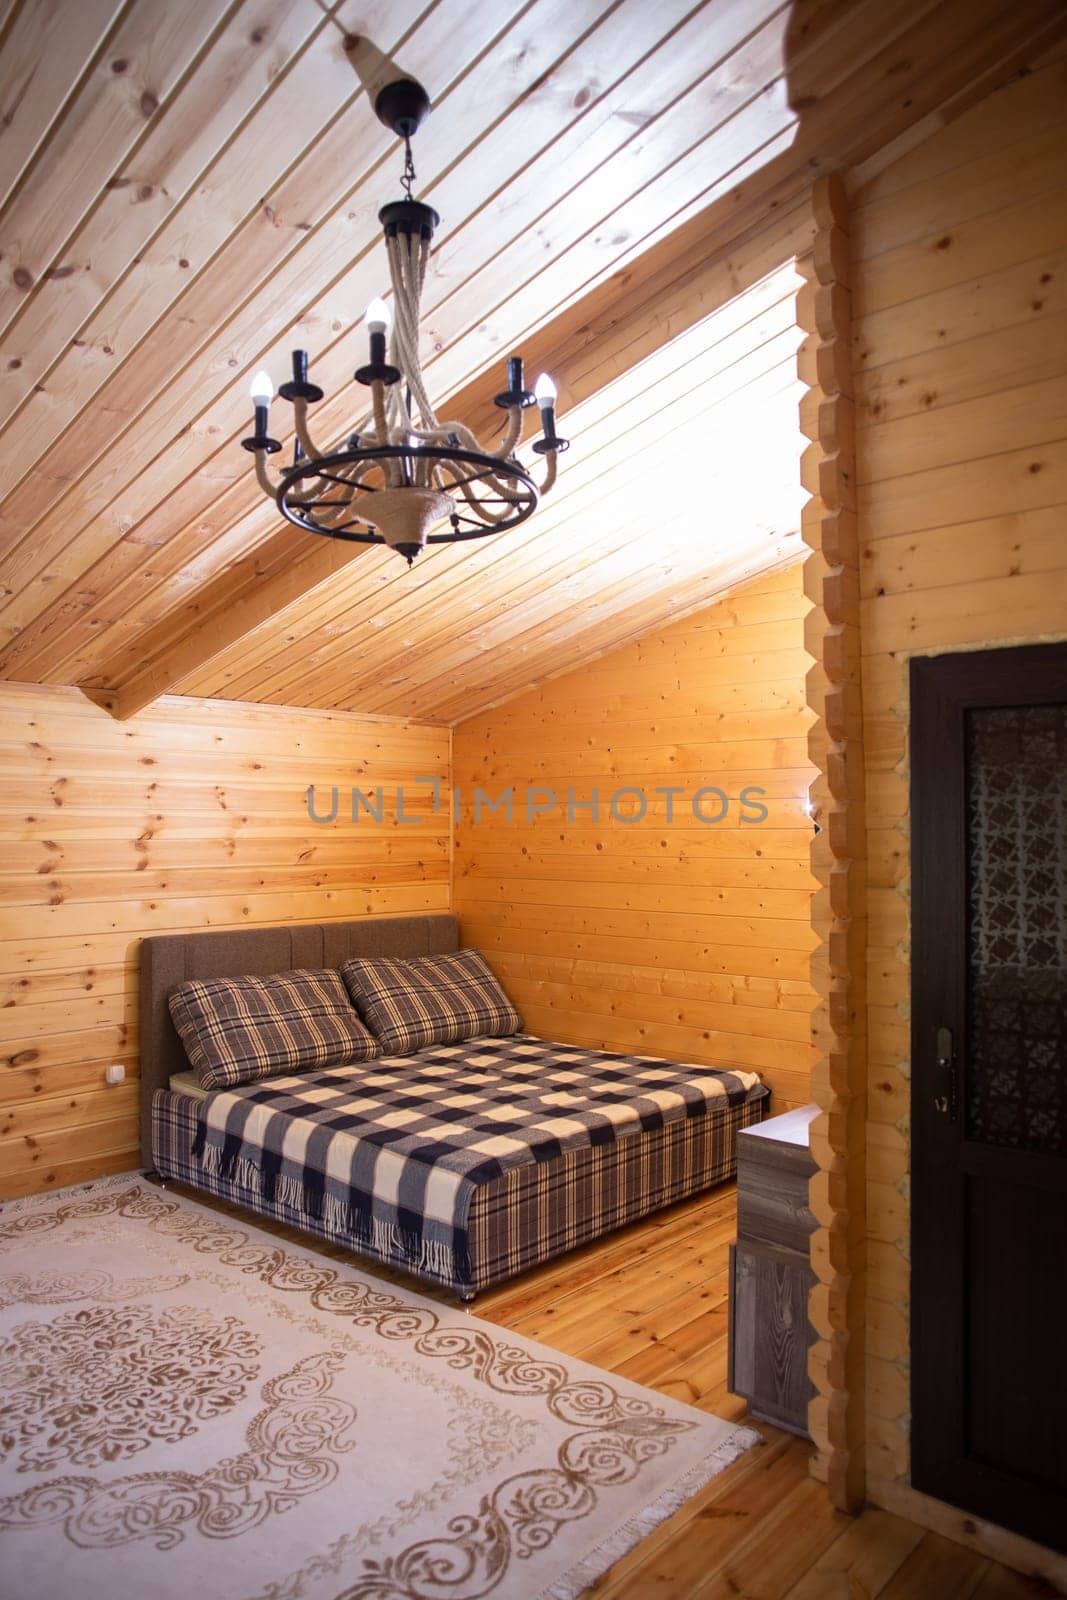 The bedroom is decorated with warm wood paneling and a soft, inviting bed. A beautiful chandelier provides soft lighting.